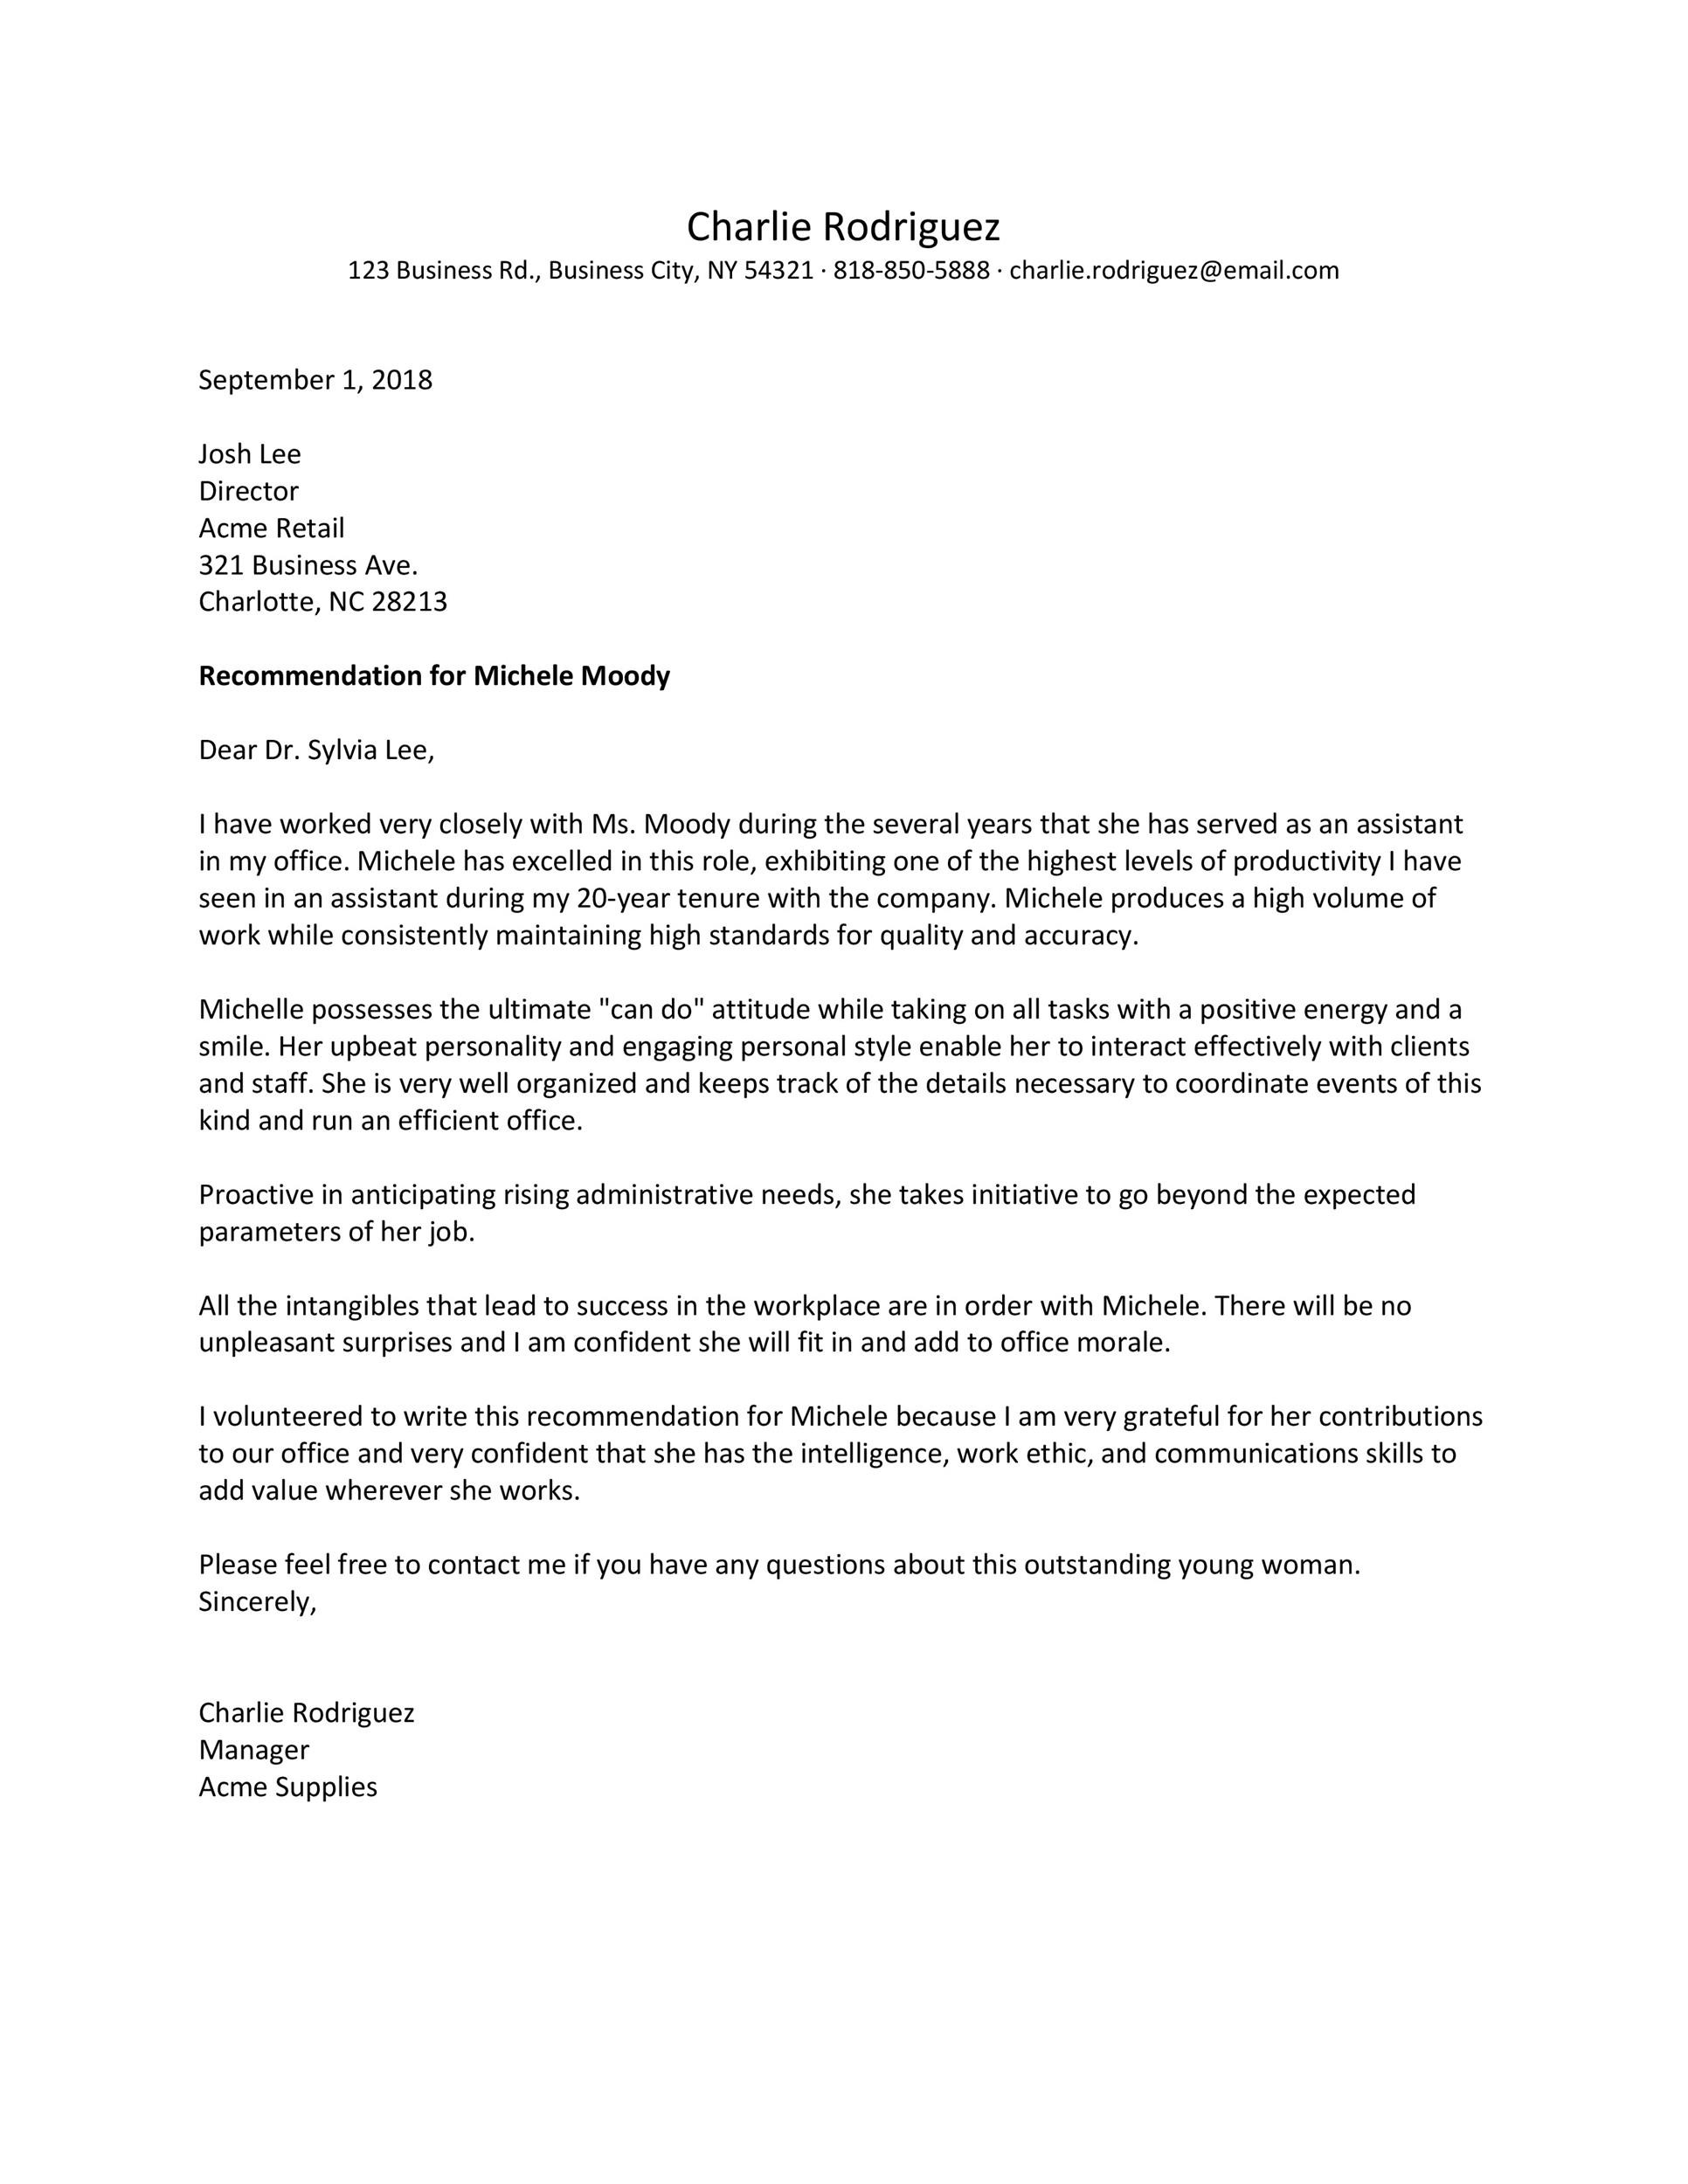 Recommendation Letter Template For Employee from templatelab.com